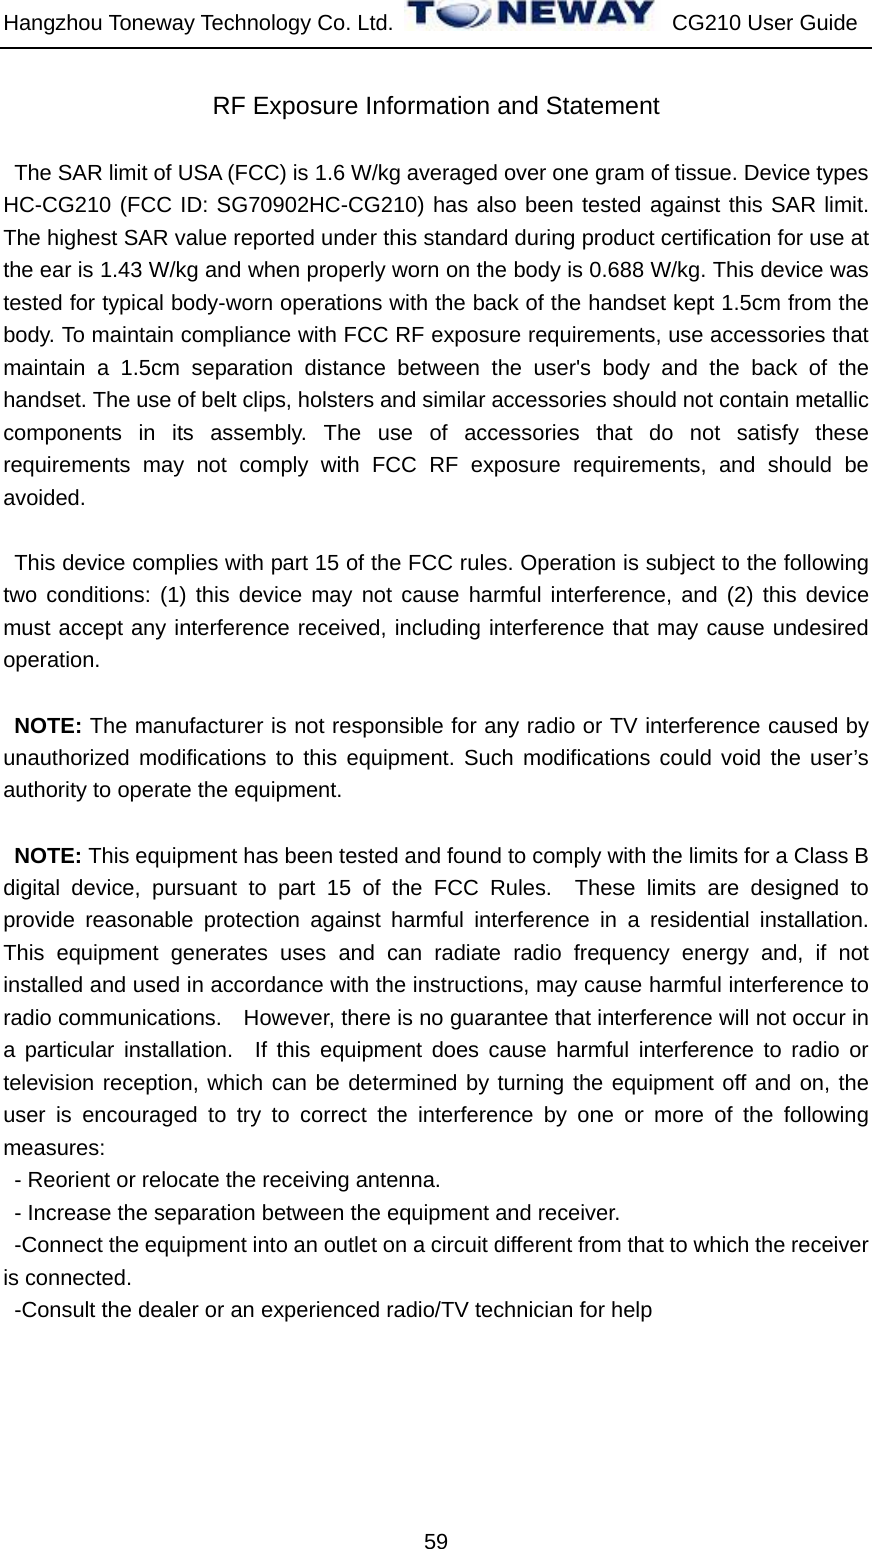 Hangzhou Toneway Technology Co. Ltd.    CG210 User Guide 59 RF Exposure Information and Statement   The SAR limit of USA (FCC) is 1.6 W/kg averaged over one gram of tissue. Device types HC-CG210 (FCC ID: SG70902HC-CG210) has also been tested against this SAR limit. The highest SAR value reported under this standard during product certification for use at the ear is 1.43 W/kg and when properly worn on the body is 0.688 W/kg. This device was tested for typical body-worn operations with the back of the handset kept 1.5cm from the body. To maintain compliance with FCC RF exposure requirements, use accessories that maintain a 1.5cm separation distance between the user&apos;s body and the back of the handset. The use of belt clips, holsters and similar accessories should not contain metallic components in its assembly. The use of accessories that do not satisfy these requirements may not comply with FCC RF exposure requirements, and should be avoided.  This device complies with part 15 of the FCC rules. Operation is subject to the following two conditions: (1) this device may not cause harmful interference, and (2) this device must accept any interference received, including interference that may cause undesired operation.  NOTE: The manufacturer is not responsible for any radio or TV interference caused by unauthorized modifications to this equipment. Such modifications could void the user’s authority to operate the equipment.  NOTE: This equipment has been tested and found to comply with the limits for a Class B digital device, pursuant to part 15 of the FCC Rules.  These limits are designed to provide reasonable protection against harmful interference in a residential installation.  This equipment generates uses and can radiate radio frequency energy and, if not installed and used in accordance with the instructions, may cause harmful interference to radio communications.    However, there is no guarantee that interference will not occur in a particular installation.  If this equipment does cause harmful interference to radio or television reception, which can be determined by turning the equipment off and on, the user is encouraged to try to correct the interference by one or more of the following measures: - Reorient or relocate the receiving antenna. - Increase the separation between the equipment and receiver. -Connect the equipment into an outlet on a circuit different from that to which the receiver is connected. -Consult the dealer or an experienced radio/TV technician for help  